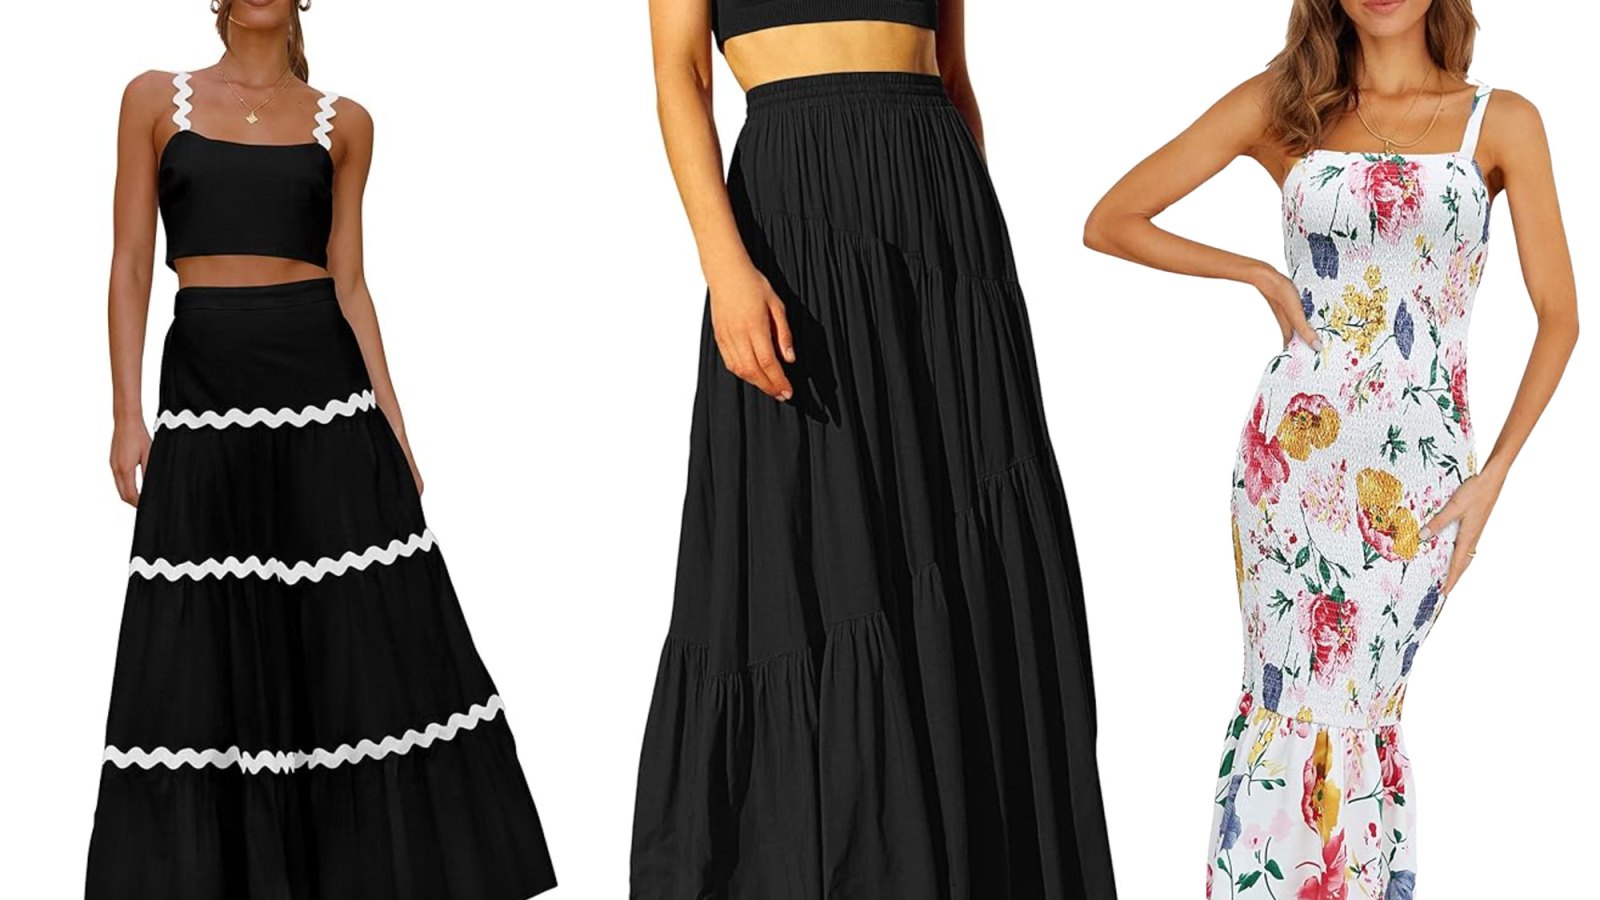 s Huge Summer Fashion Sale Is Packed with 1,000+ Deals